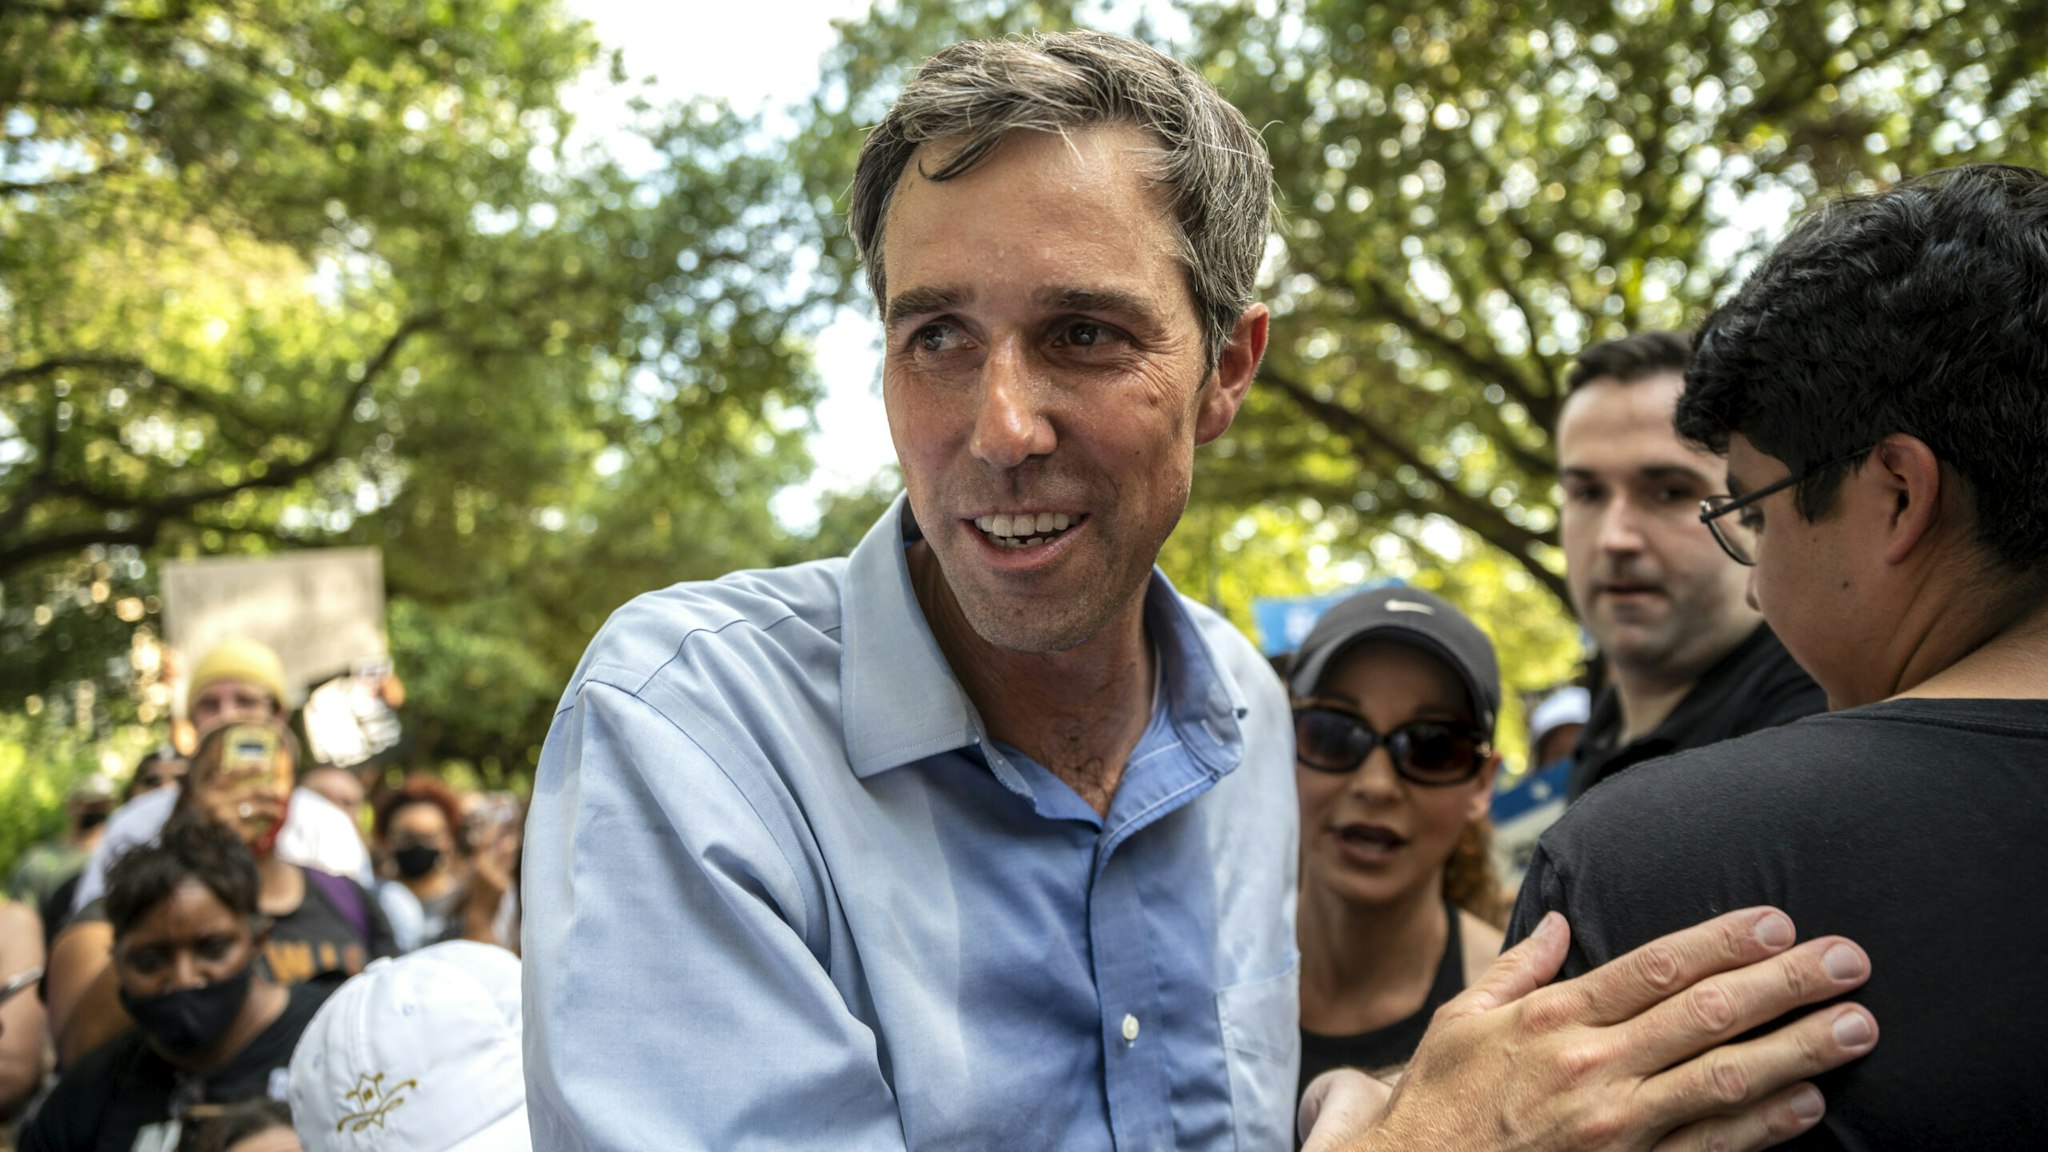 AUSTIN, TX - JUNE 20: Former U.S. Rep. Beto O'Rourke (D-TX) walks through a crowd at the state Capitol on June 20, 2021 in Austin, Texas. The rally is one of many O'Rourke is holding across Texas to fight SB7, a controversial voting bill that was derailed after house Democrats walked out of the session. The bill set limits on early voting hours, banned drive-through voting, made it a felony for officials to send unsolicited absentee ballot requests and lowered the standard for overturning an election based on fraud. Gov. Greg Abbott has vowed to call a special session on the measure.